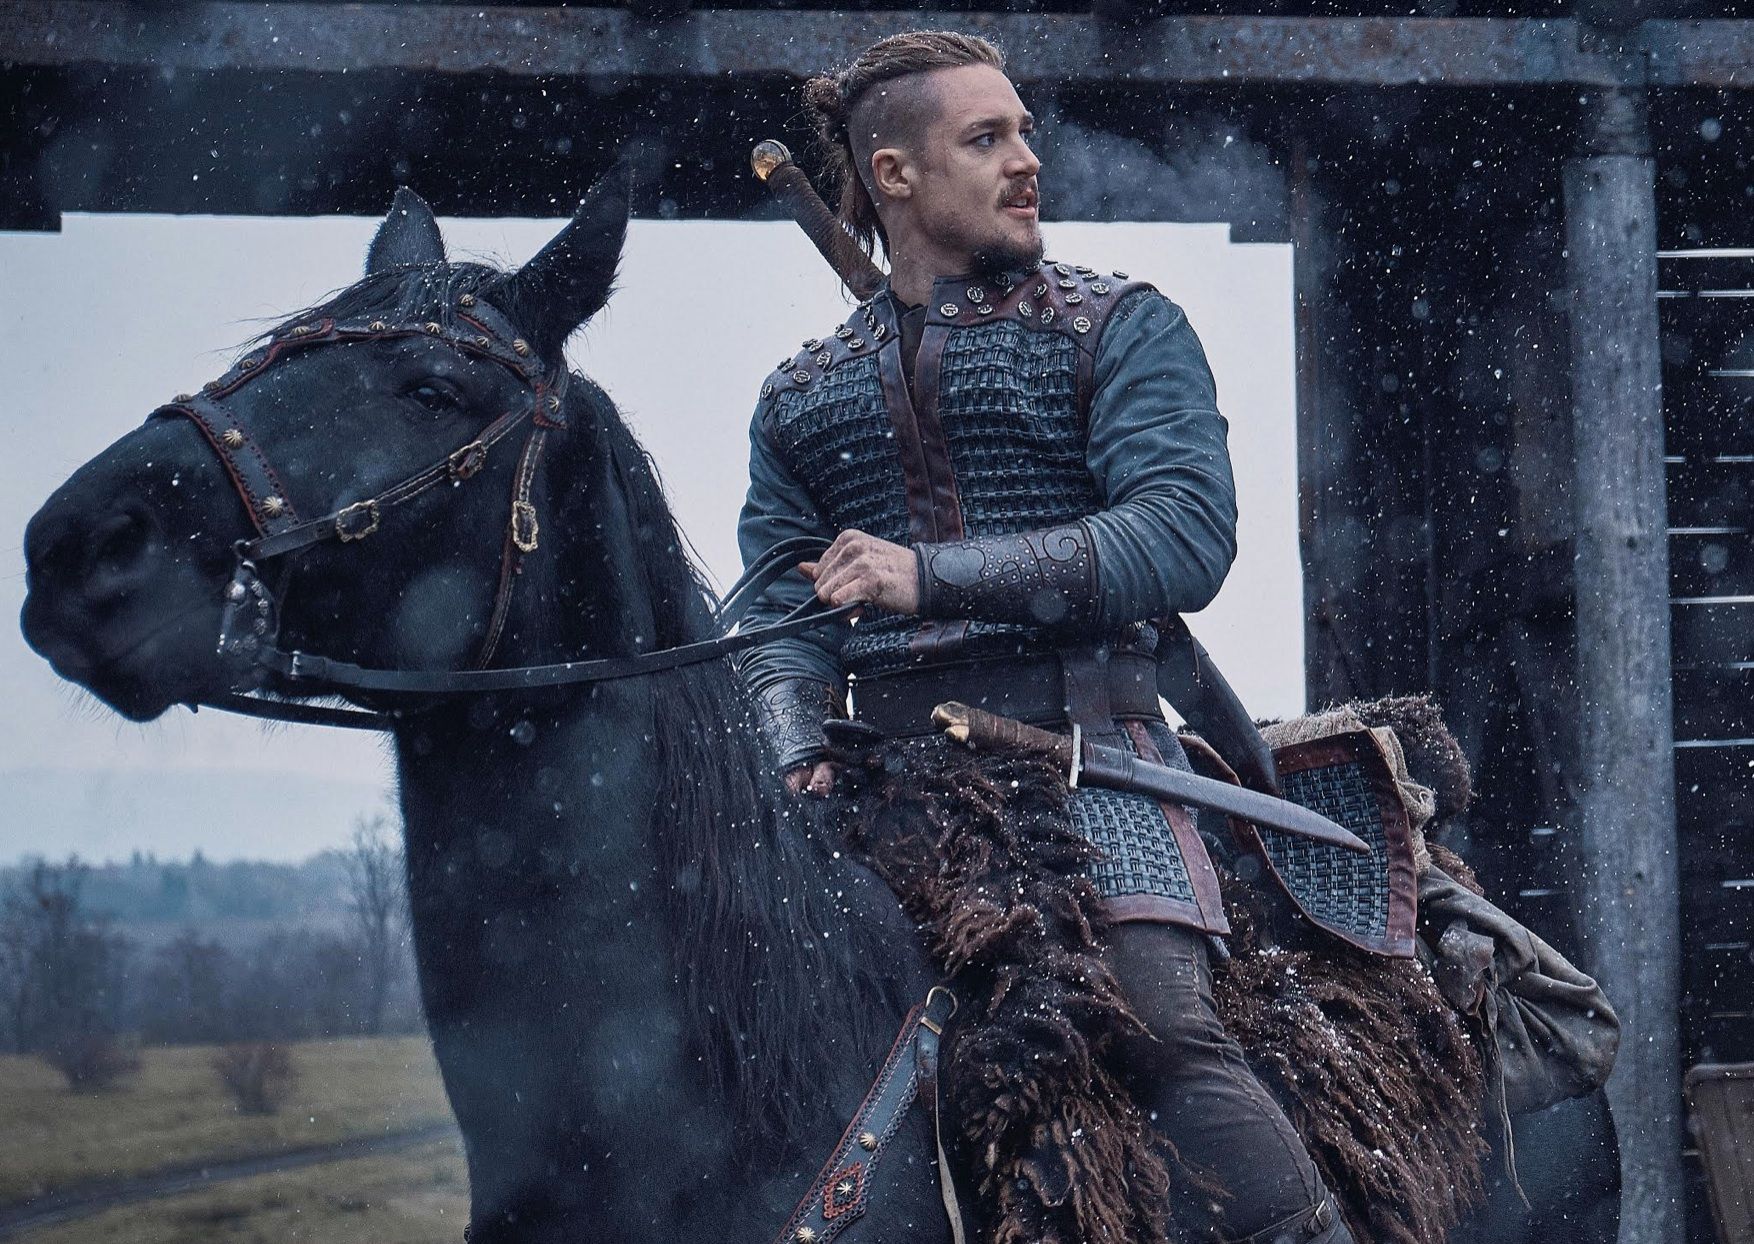 The Last Kingdom Season 5: Here’s The Release Date and Other Details